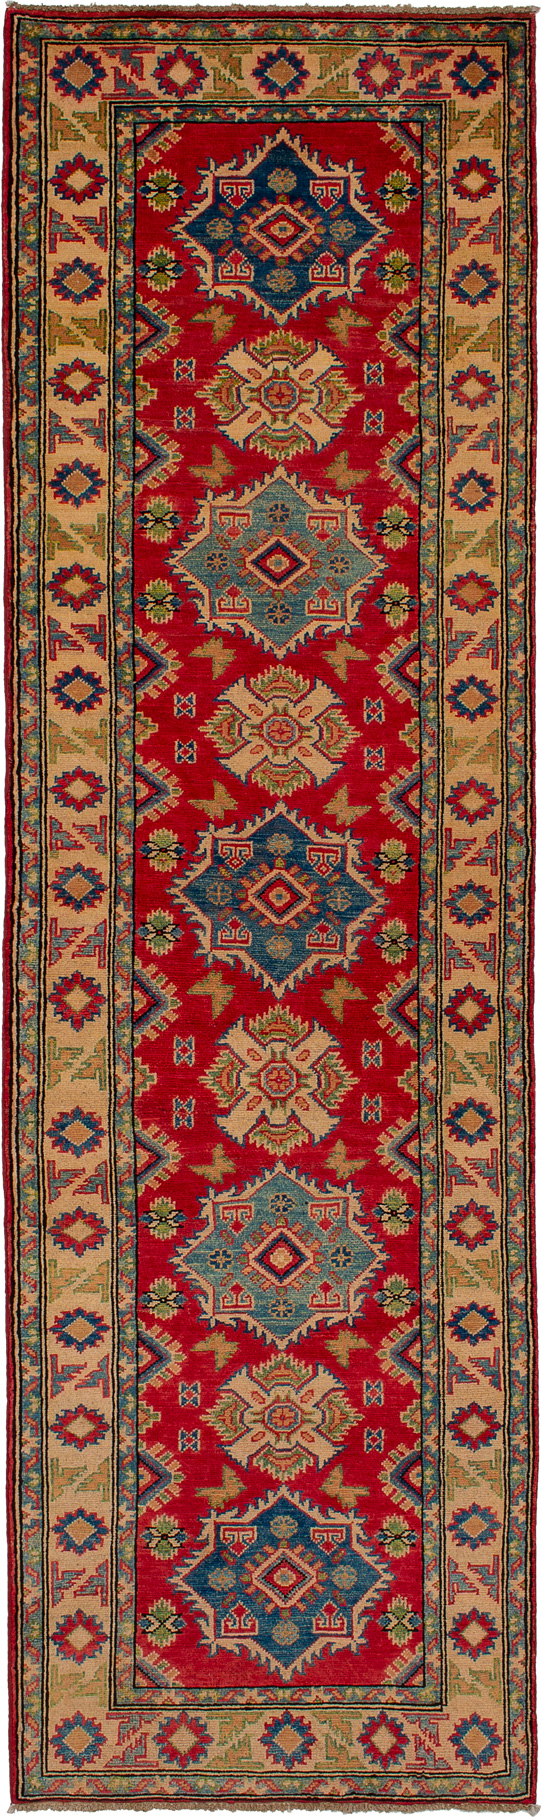 Hand-knotted Finest Gazni Red Wool Rug 2'8" x 9'2" Size: 2'8" x 9'2"  